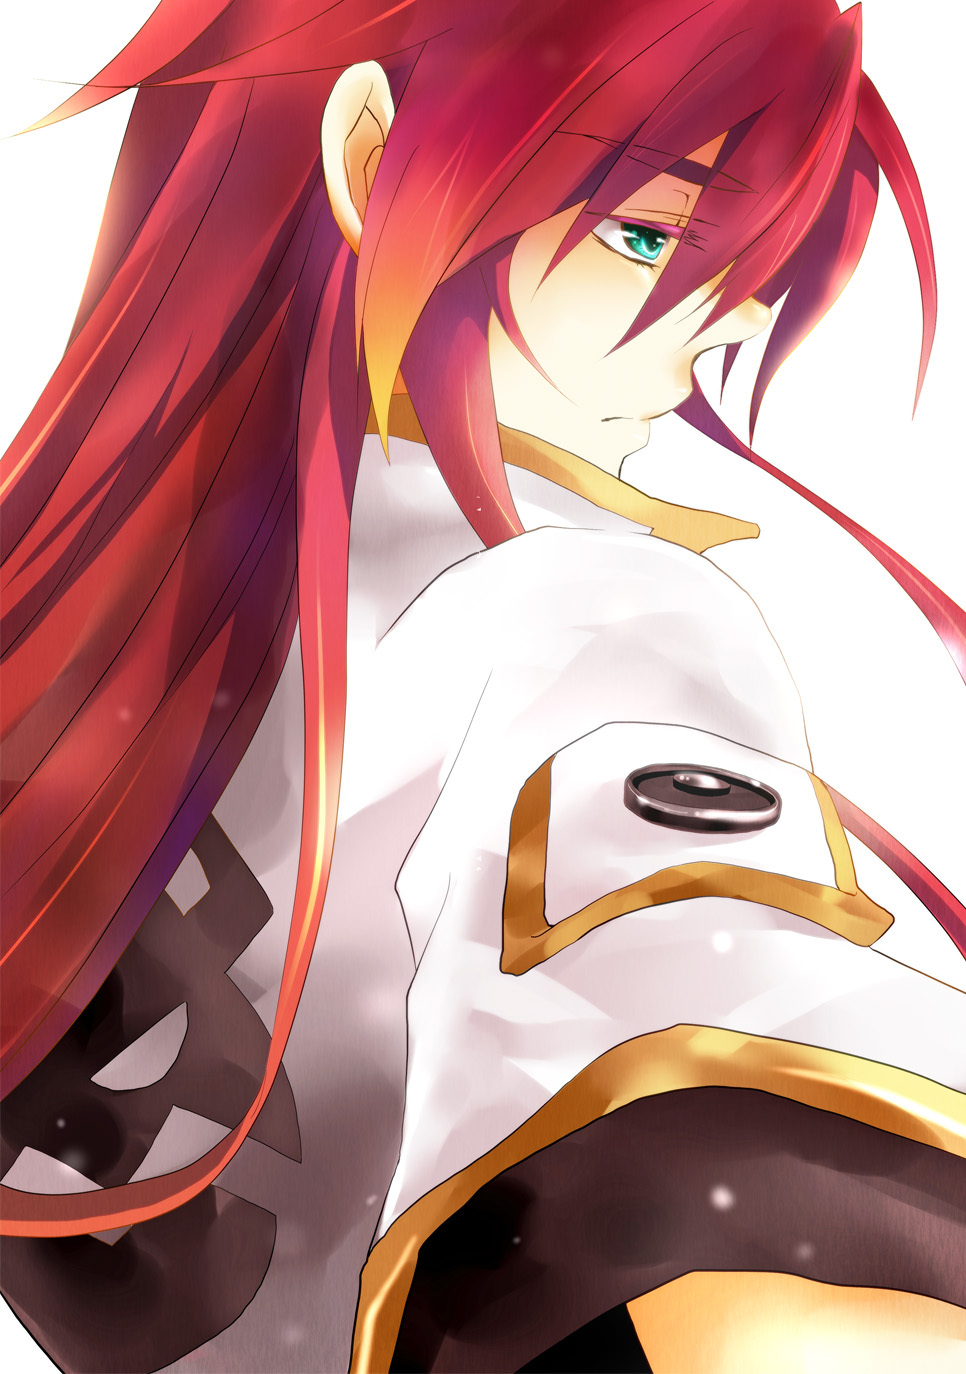 Anime Guy With Red Long Hair - 966x1374 Wallpaper 